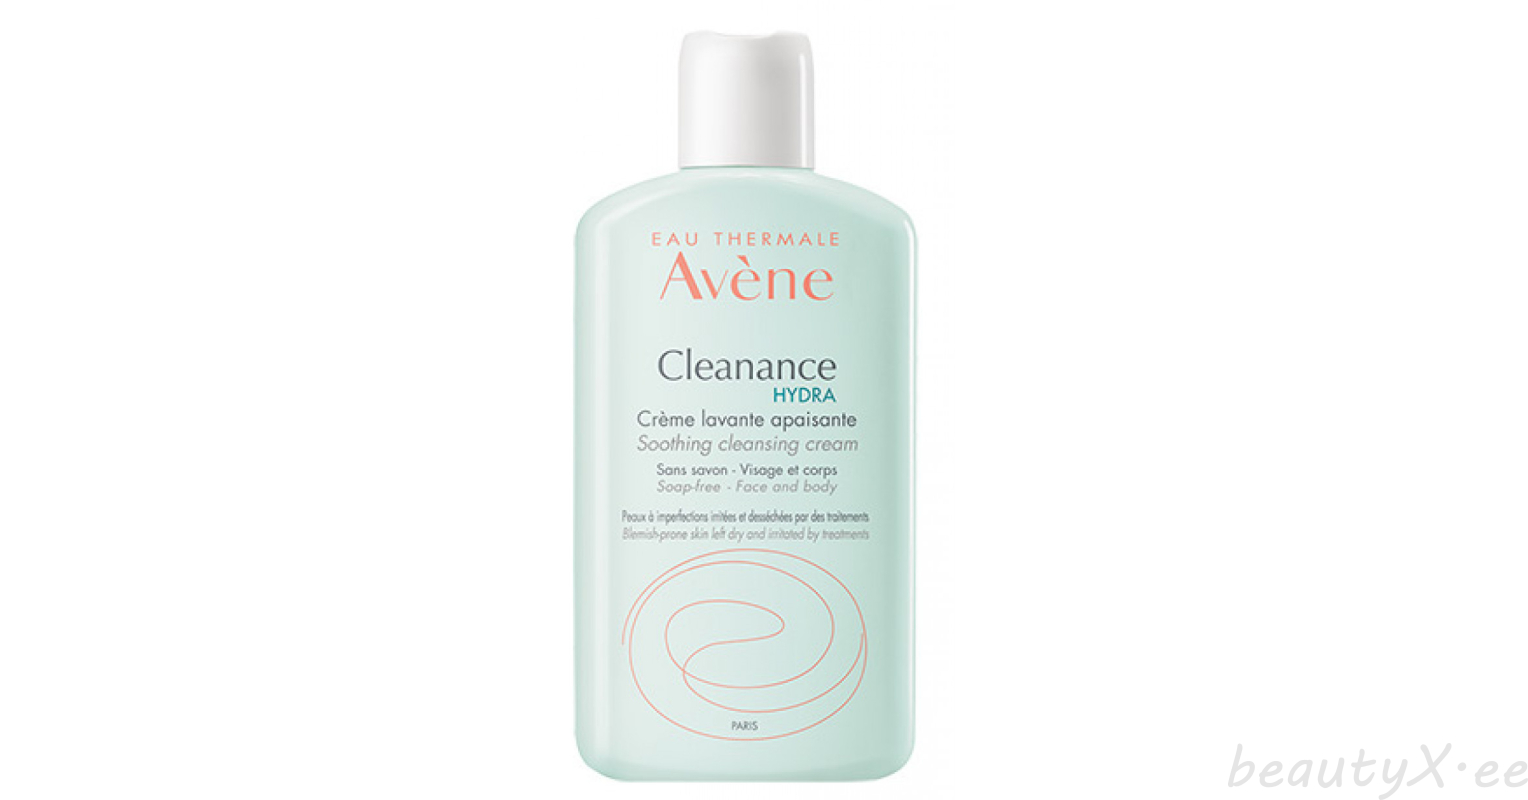 AVÈNE CLEANANCE HYDRA SOOTHING CLEANSING CREAM